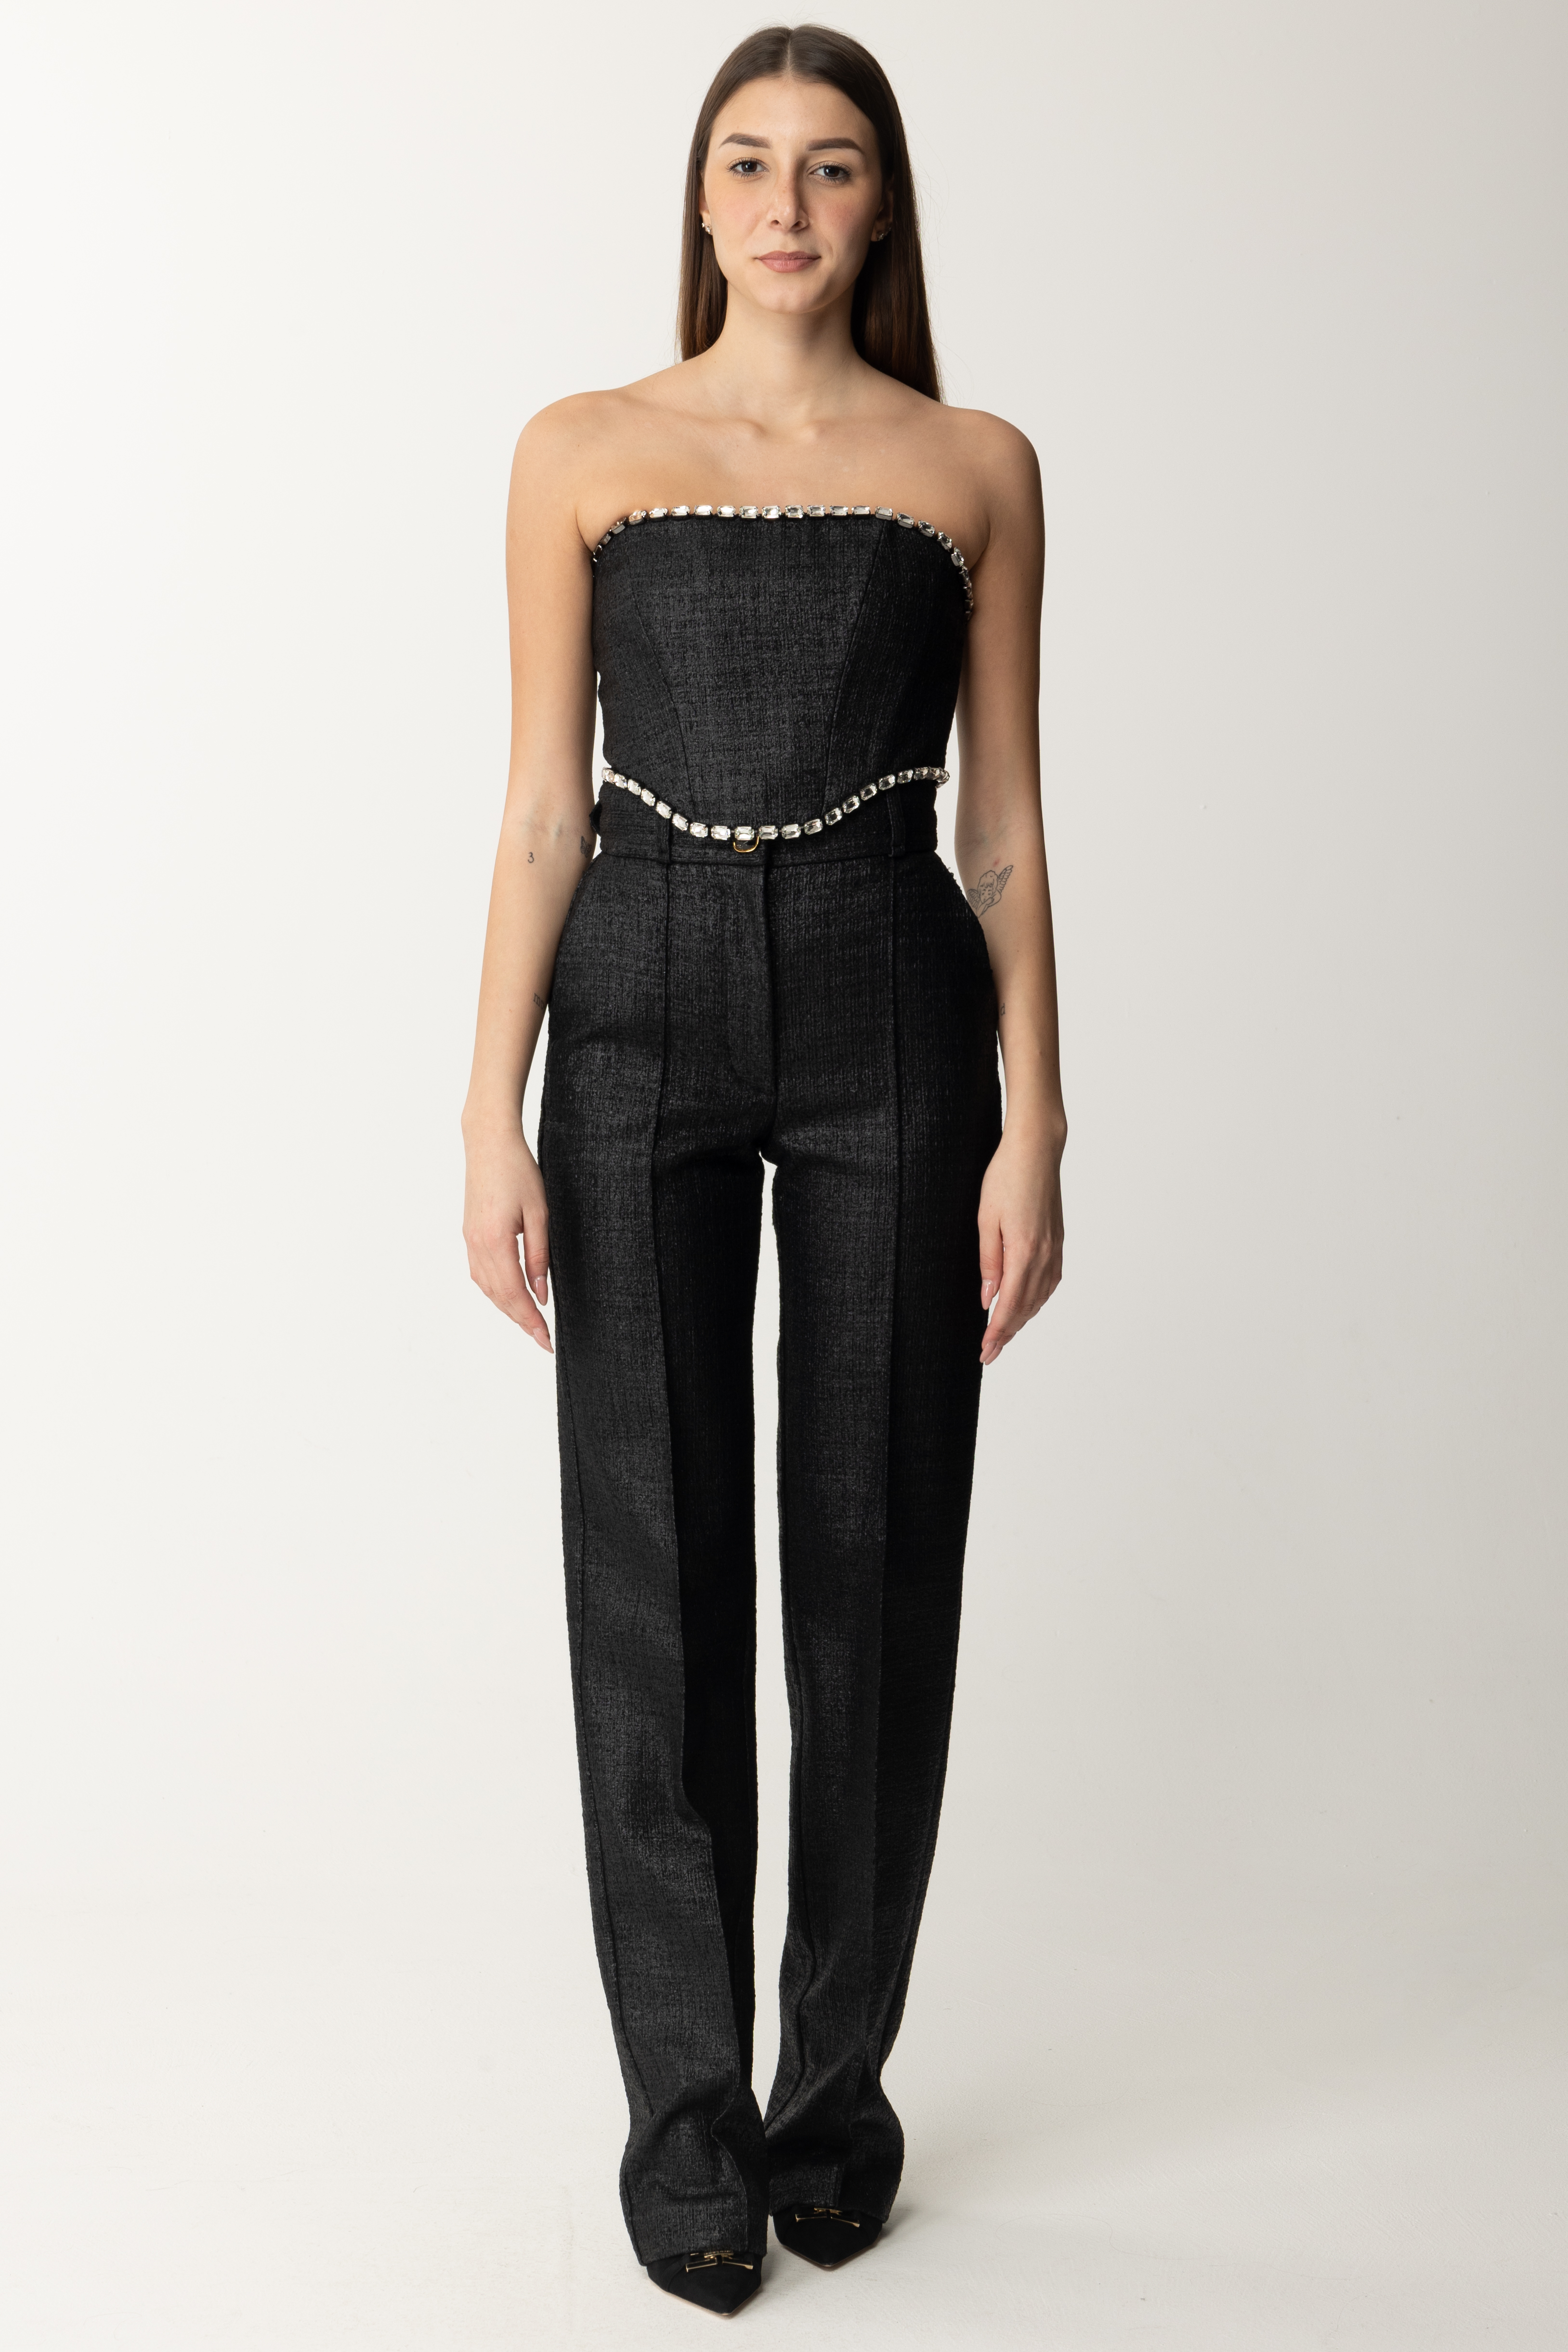 Preview: Elisabetta Franchi Laminated tweed top with stones Nero